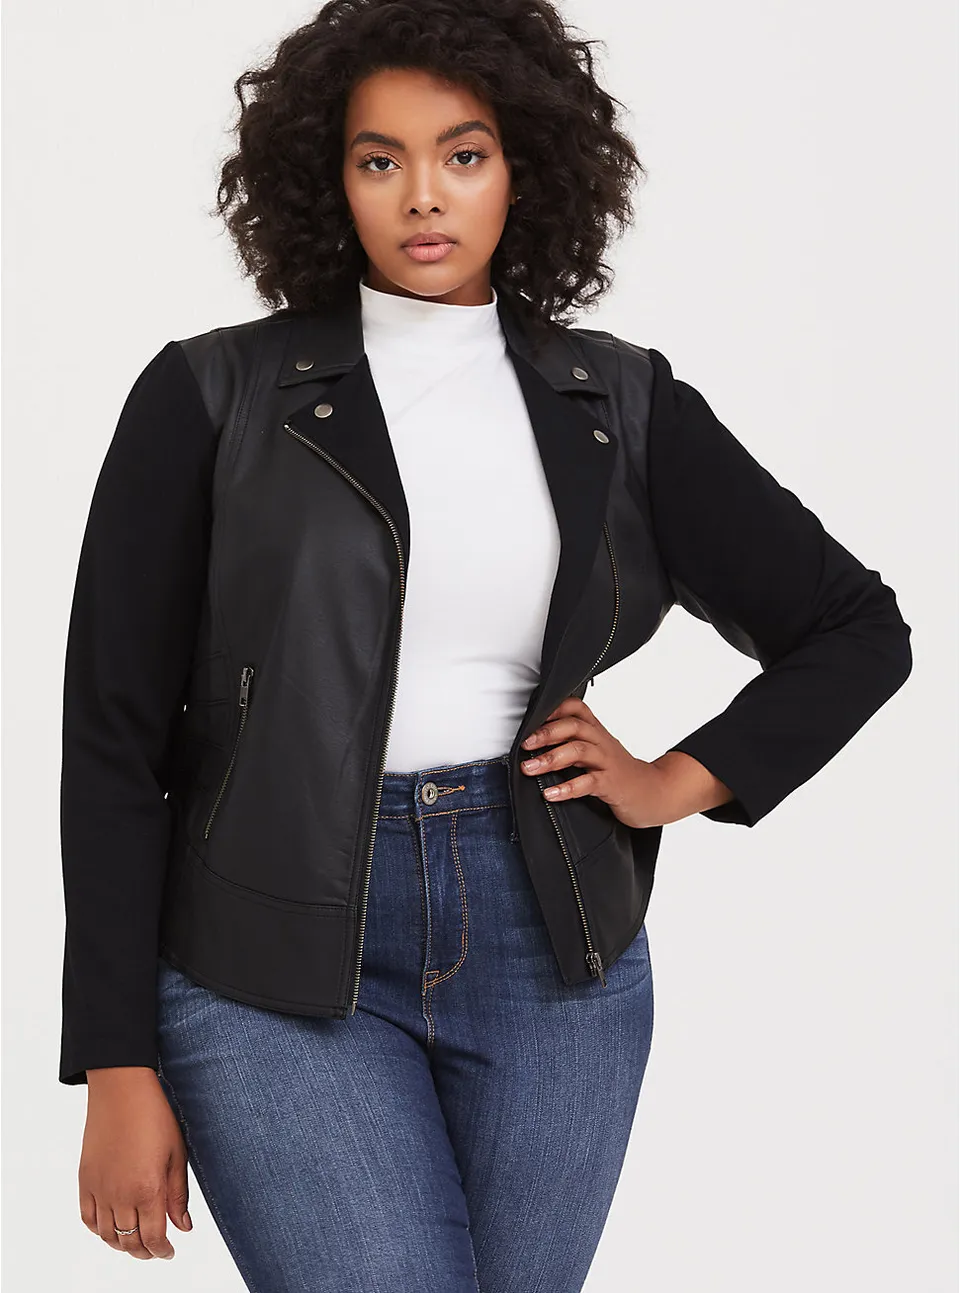 15 Affordable Leather Jackets That Will Elevate Your Look | HuffPost Life